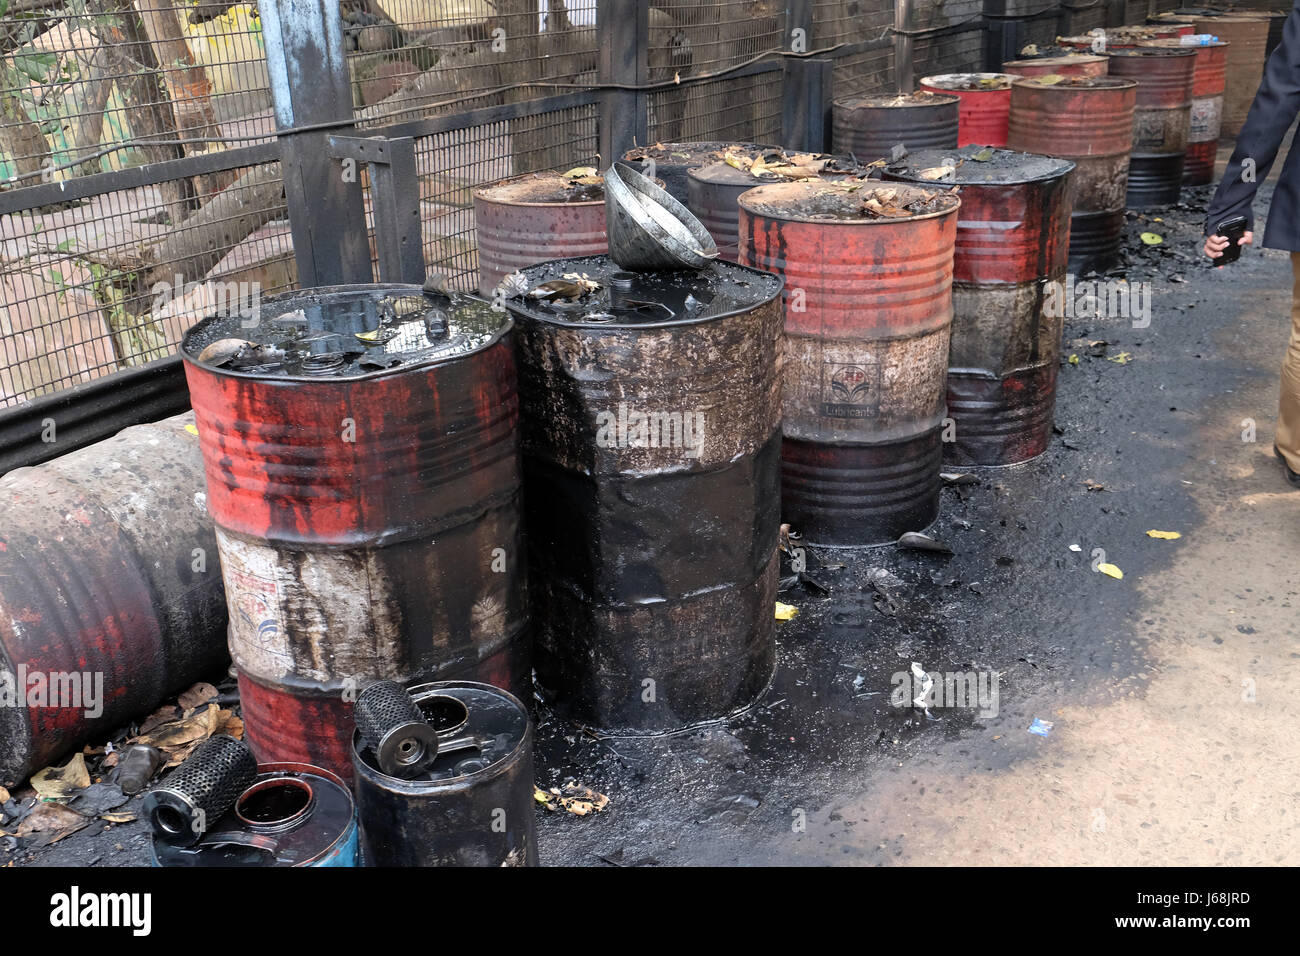 Old rusty barrel left in the road leaking thick black tar or oil on an urban street in Kolkata, India on February 10, 20 Stock Photo